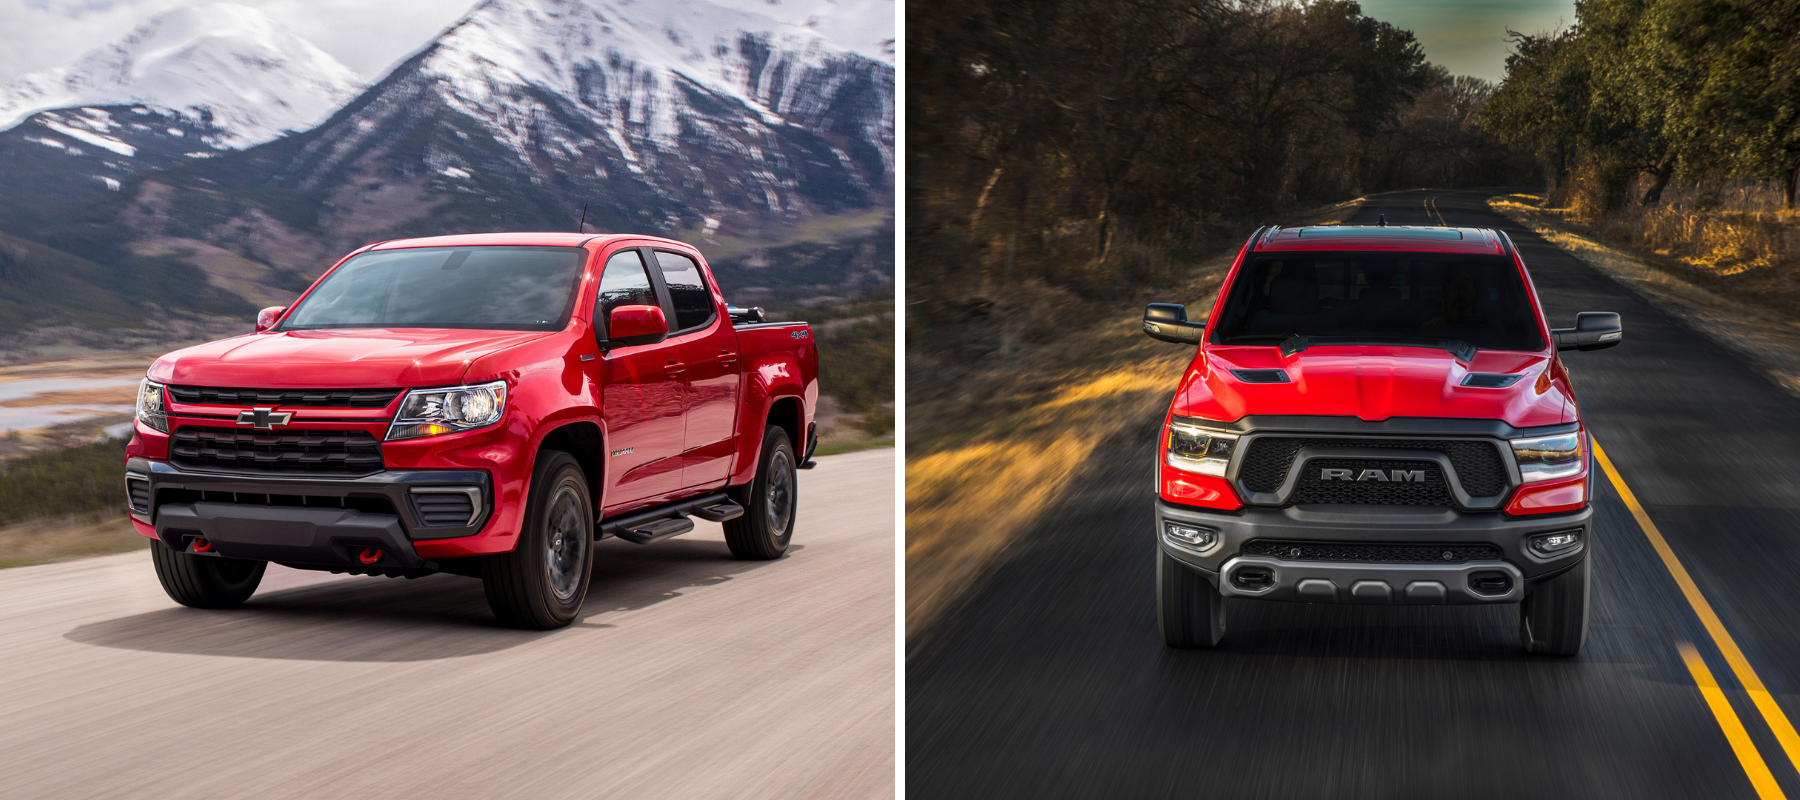 2022 Chevy Silverado 1500 Trail Boss and 2022 Ram 1500 Rebel full-size off-road pickup truck models in red paint colors